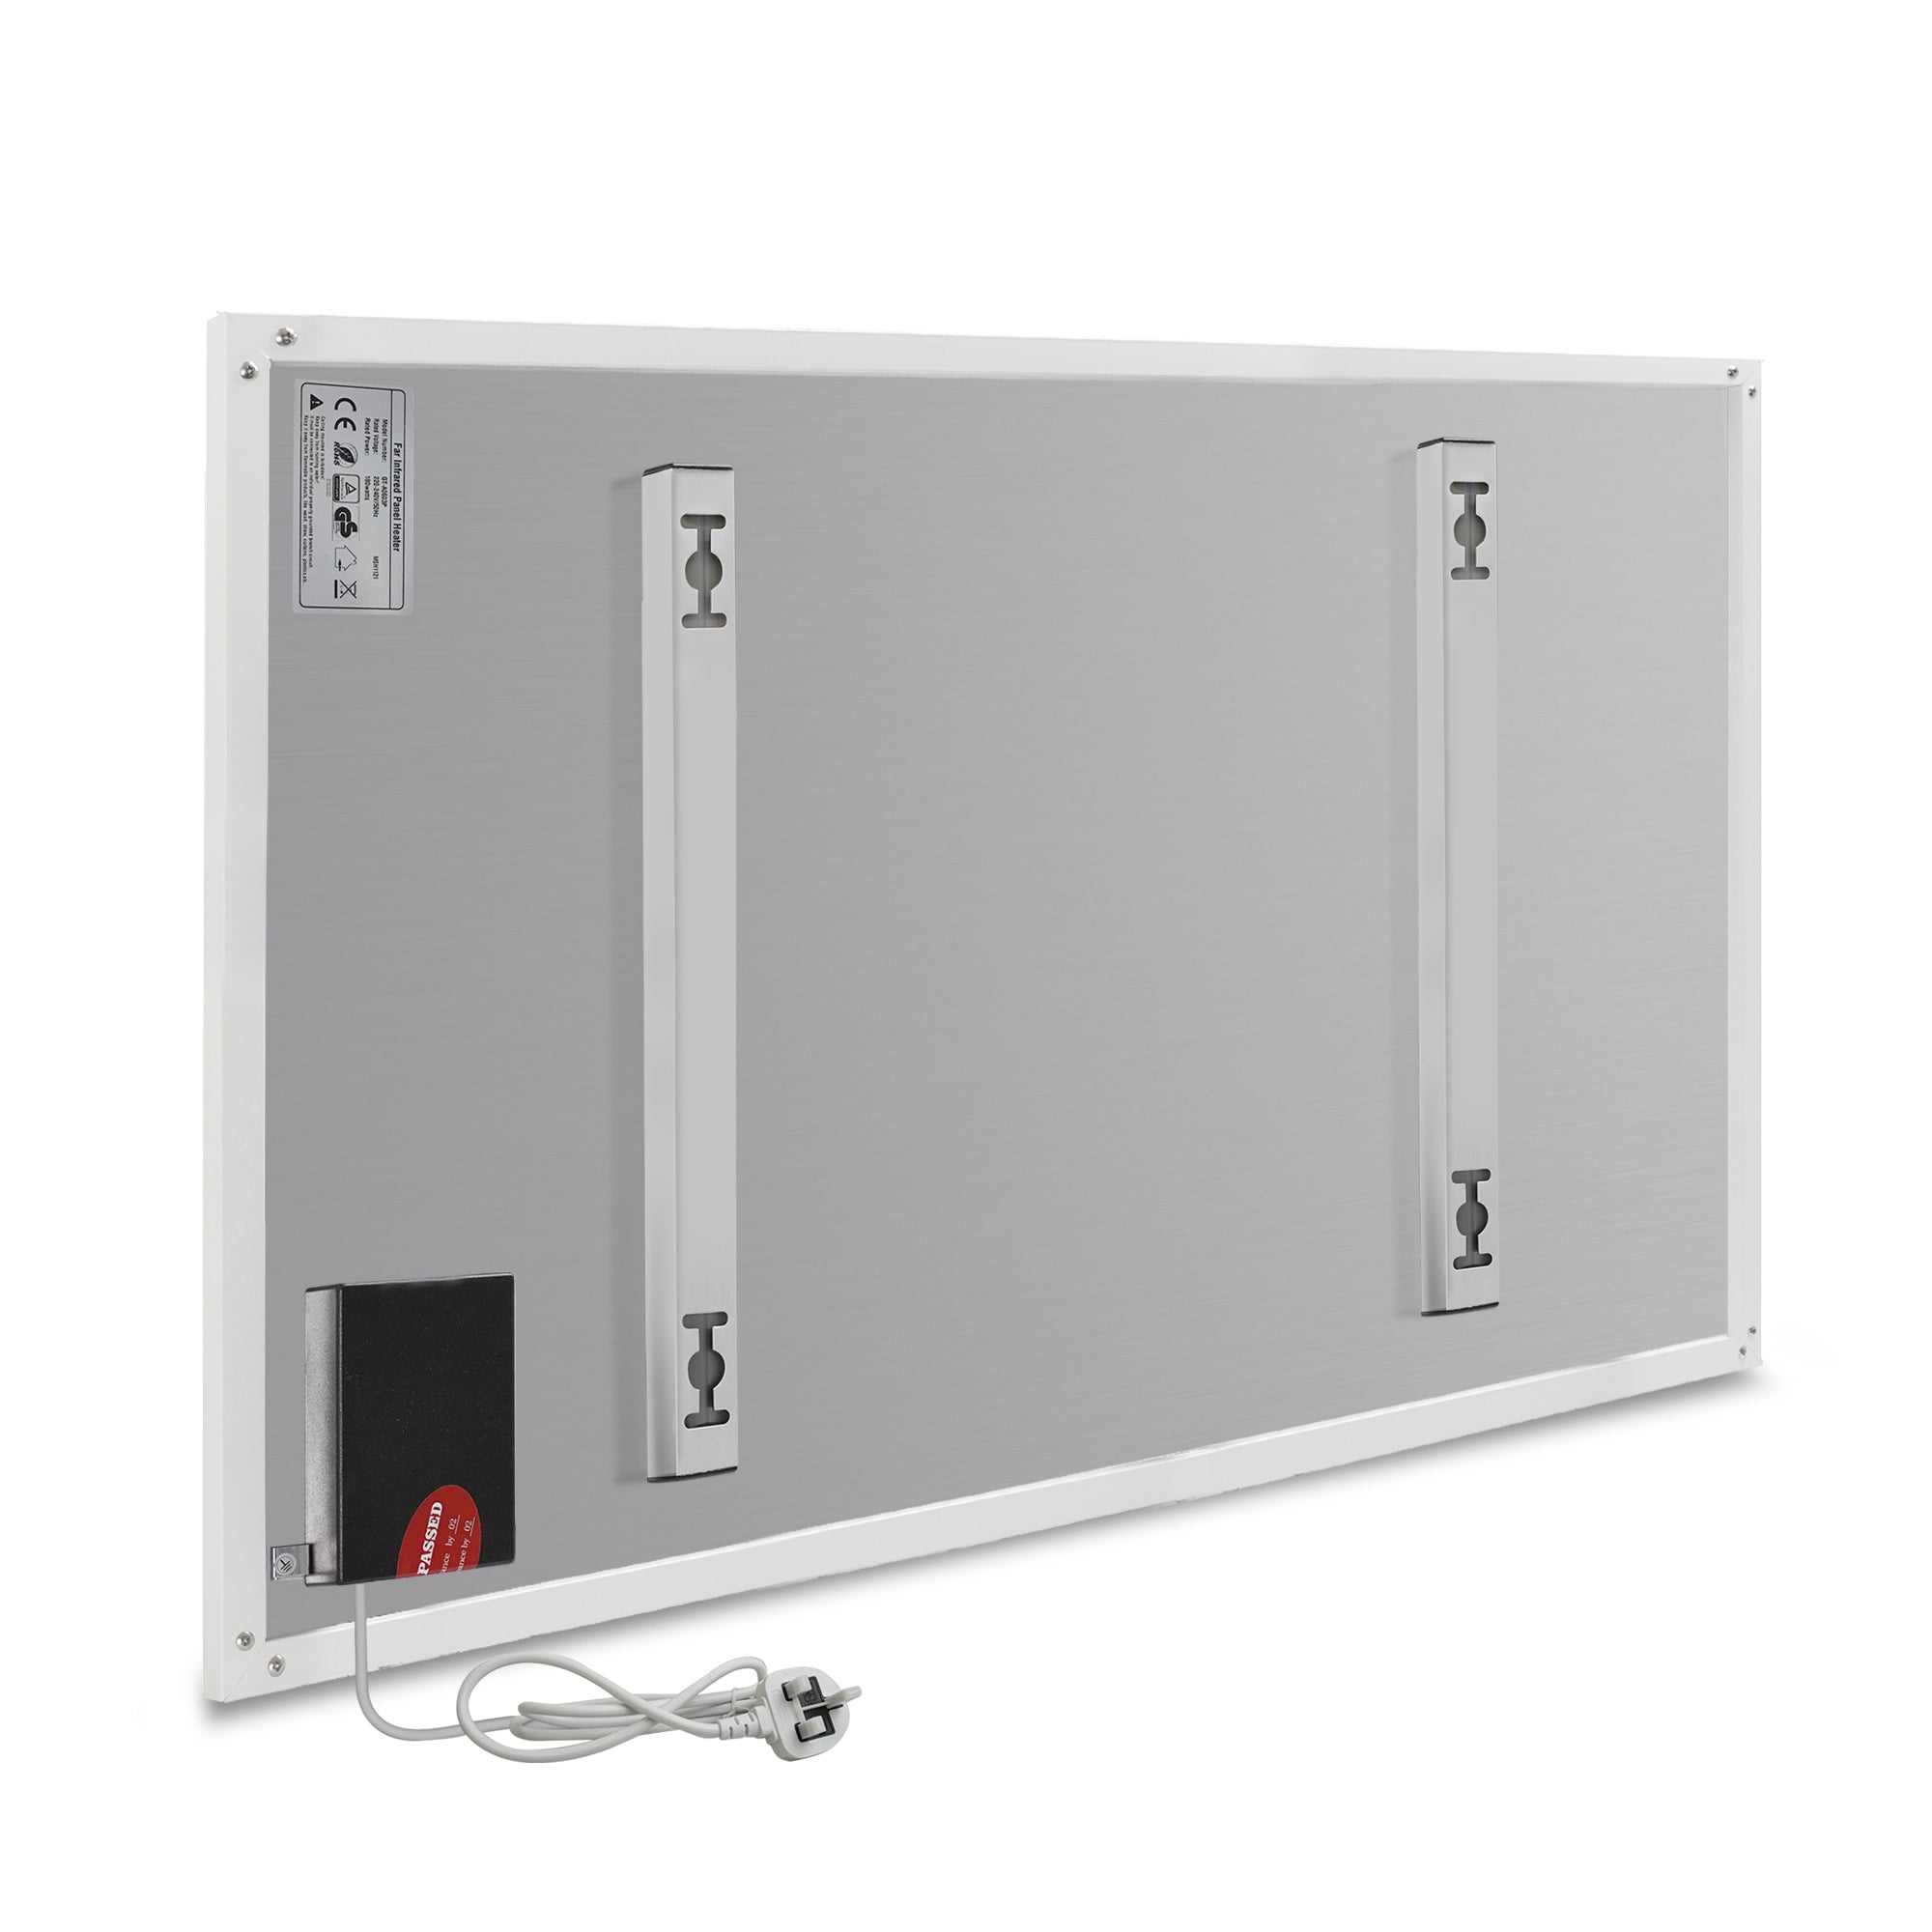 900W Personalised Image NRGPRO Infrared Heating Panel - Electric Wall Panel Heater